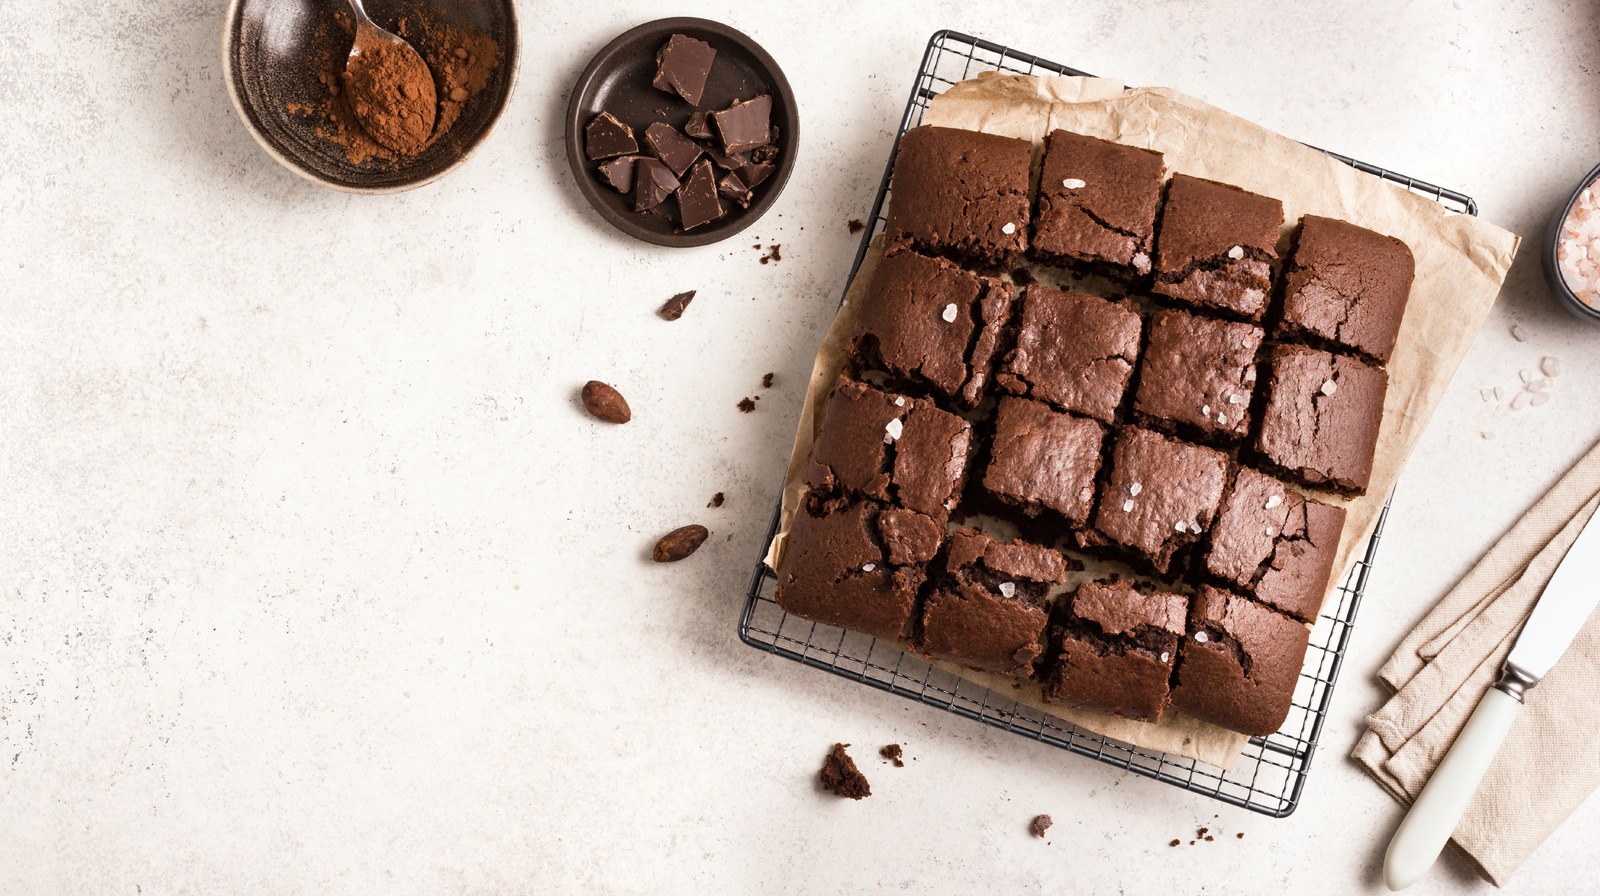 https://www.thedailymeal.com/img/gallery/10-easy-ways-to-kick-your-brownies-up-a-notch/l-intro-1676840338.jpg